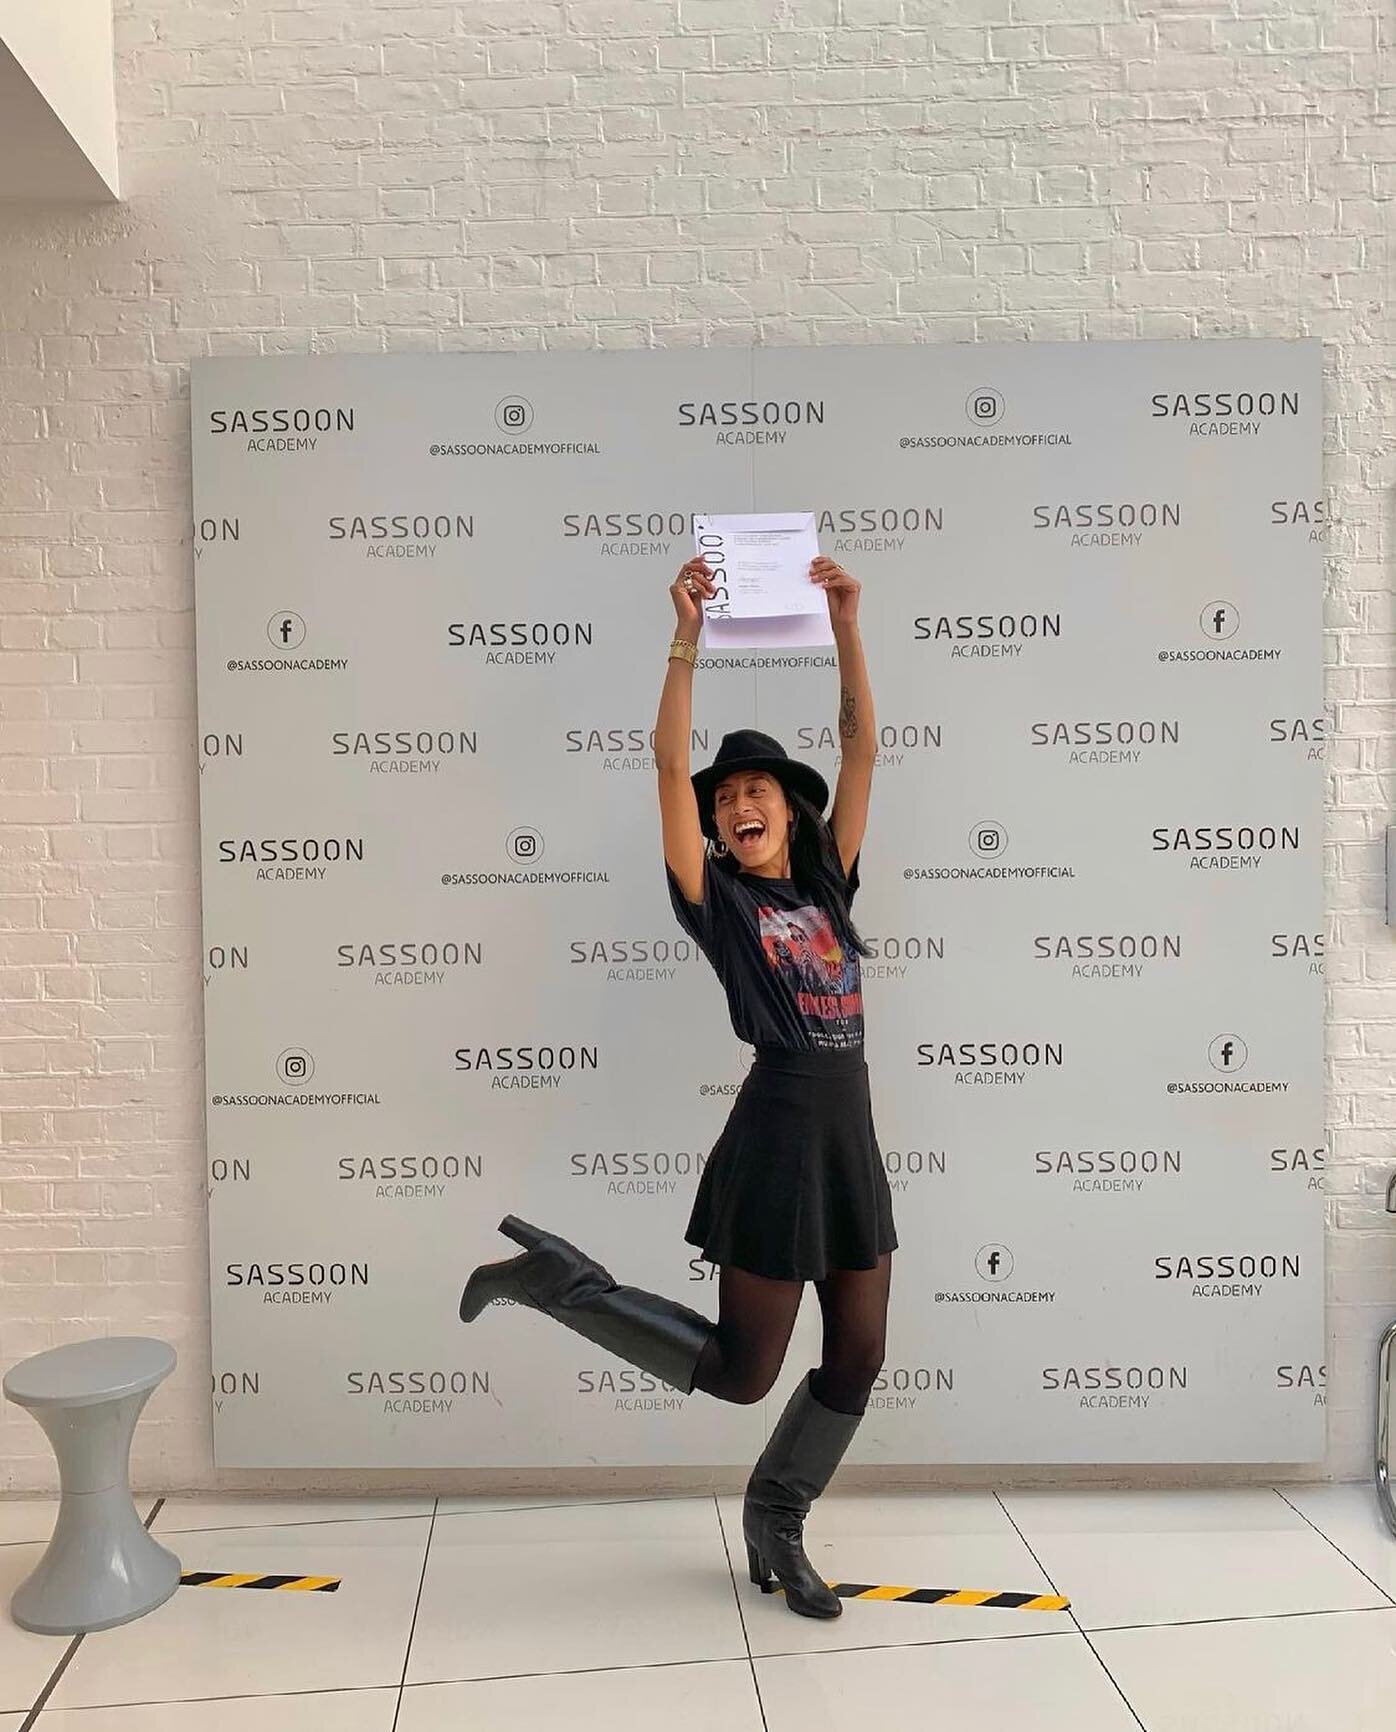 Congratulations Angie | @bangingbeatniks on completing her major @sassoonacademyofficial 6-week training course in London! She will be back full of inspiration and ready for the world, June 5th! Book now as reservations are getting harder and harder 